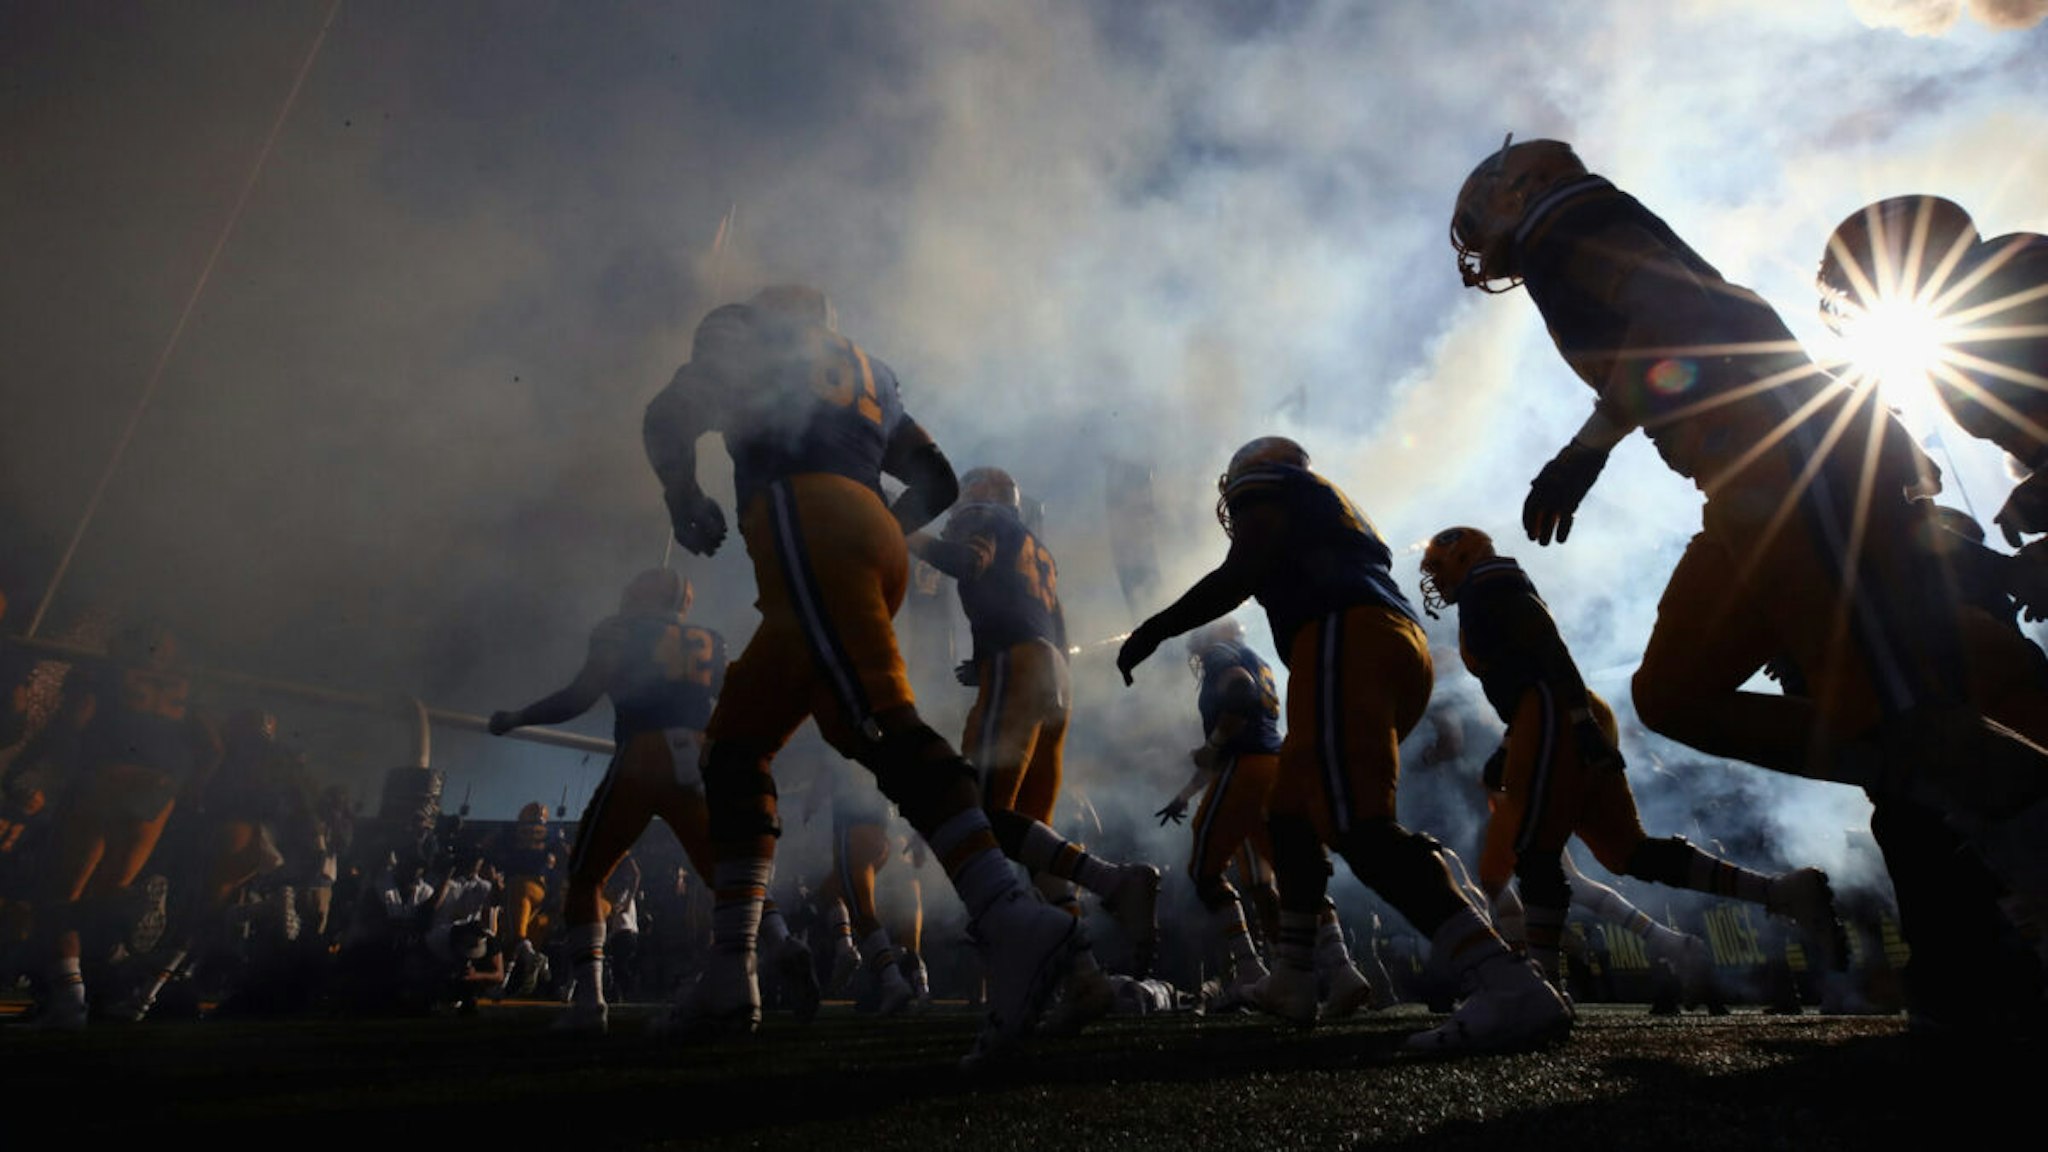 The California Golden Bears run out on to the field for their game against the UCLA Bruins at California Memorial Stadium on October 13, 2018 in Berkeley, California.